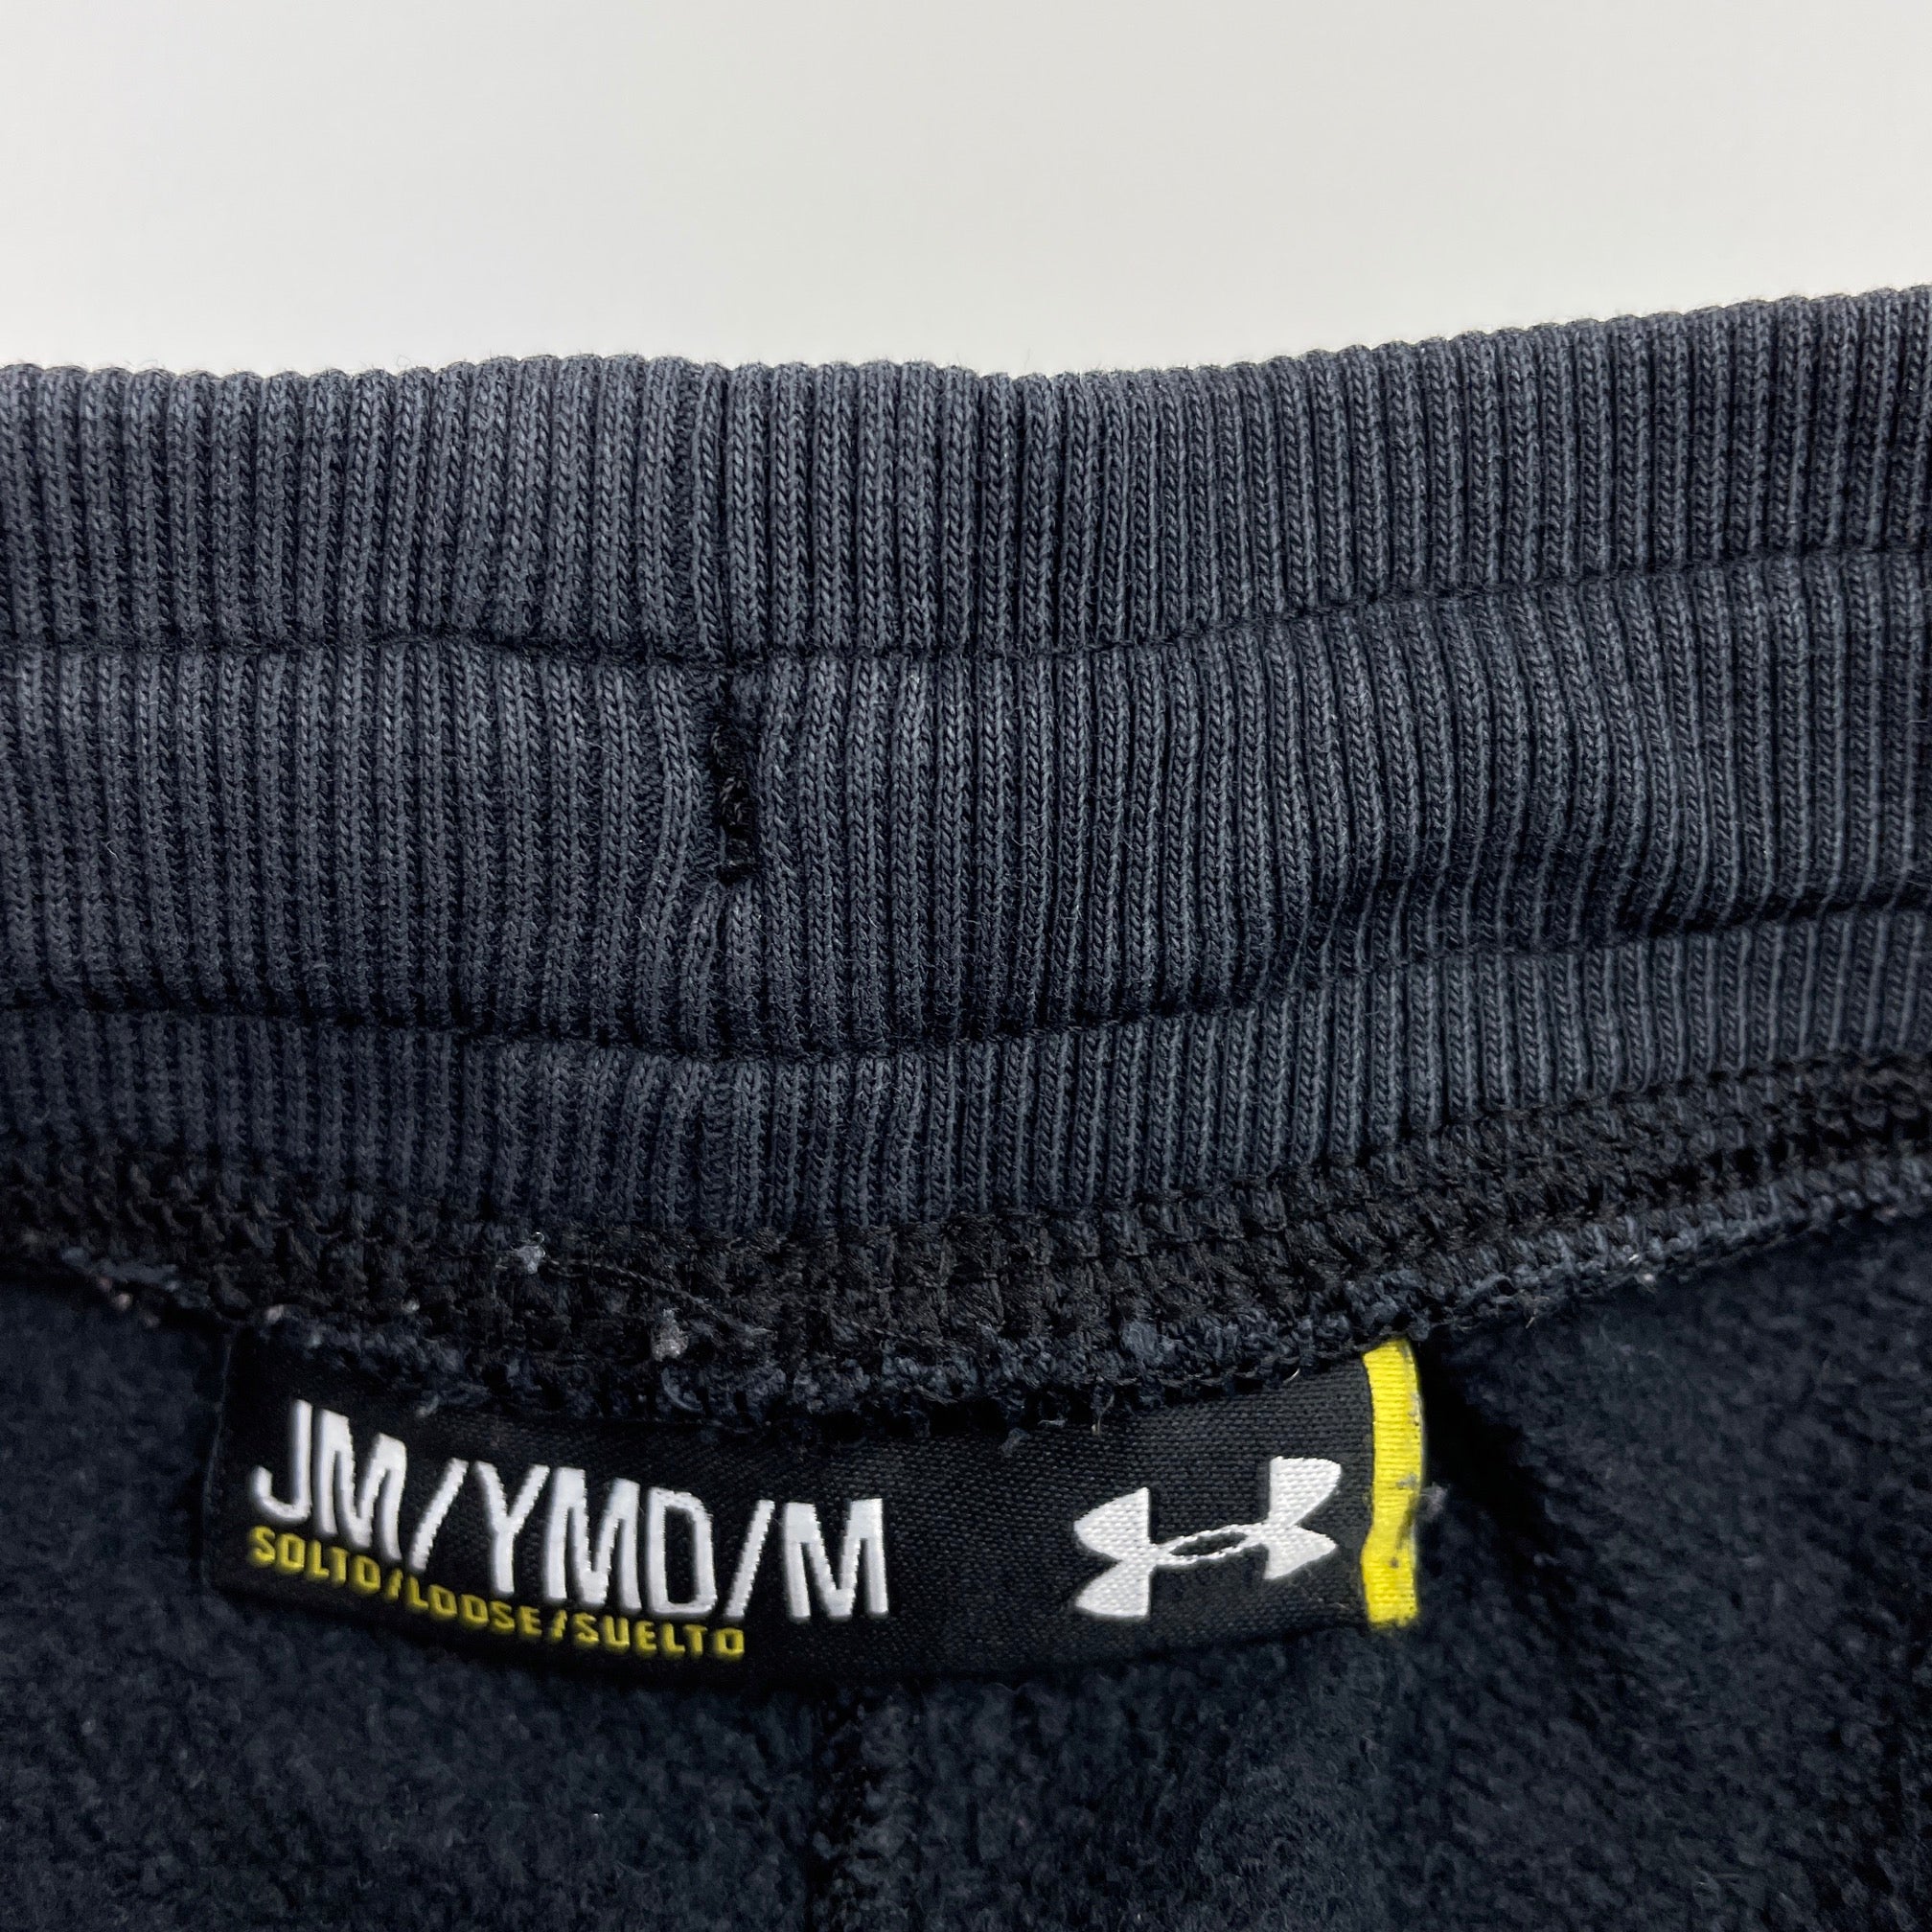 Under Armour, loose fit fleece lined track pants, elasticated, Inside leg:  67cm, Sz: M, FUC, size 10-11, – DaisyChainClothing